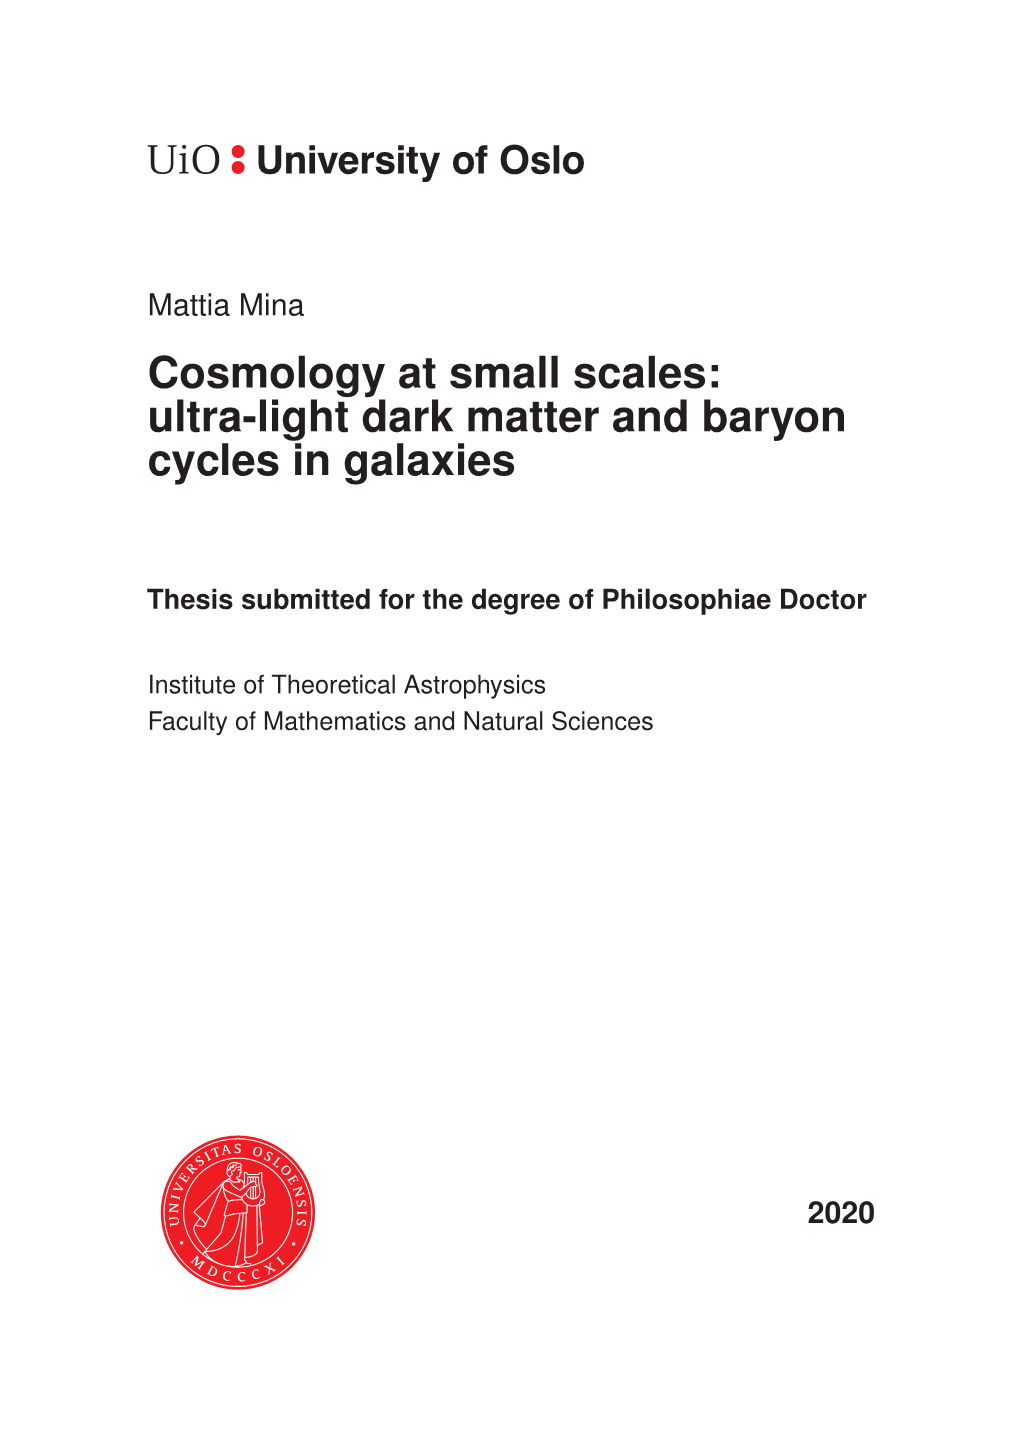 Cosmology at Small Scales: Ultra-Light Dark Matter and Baryon Cycles in Galaxies